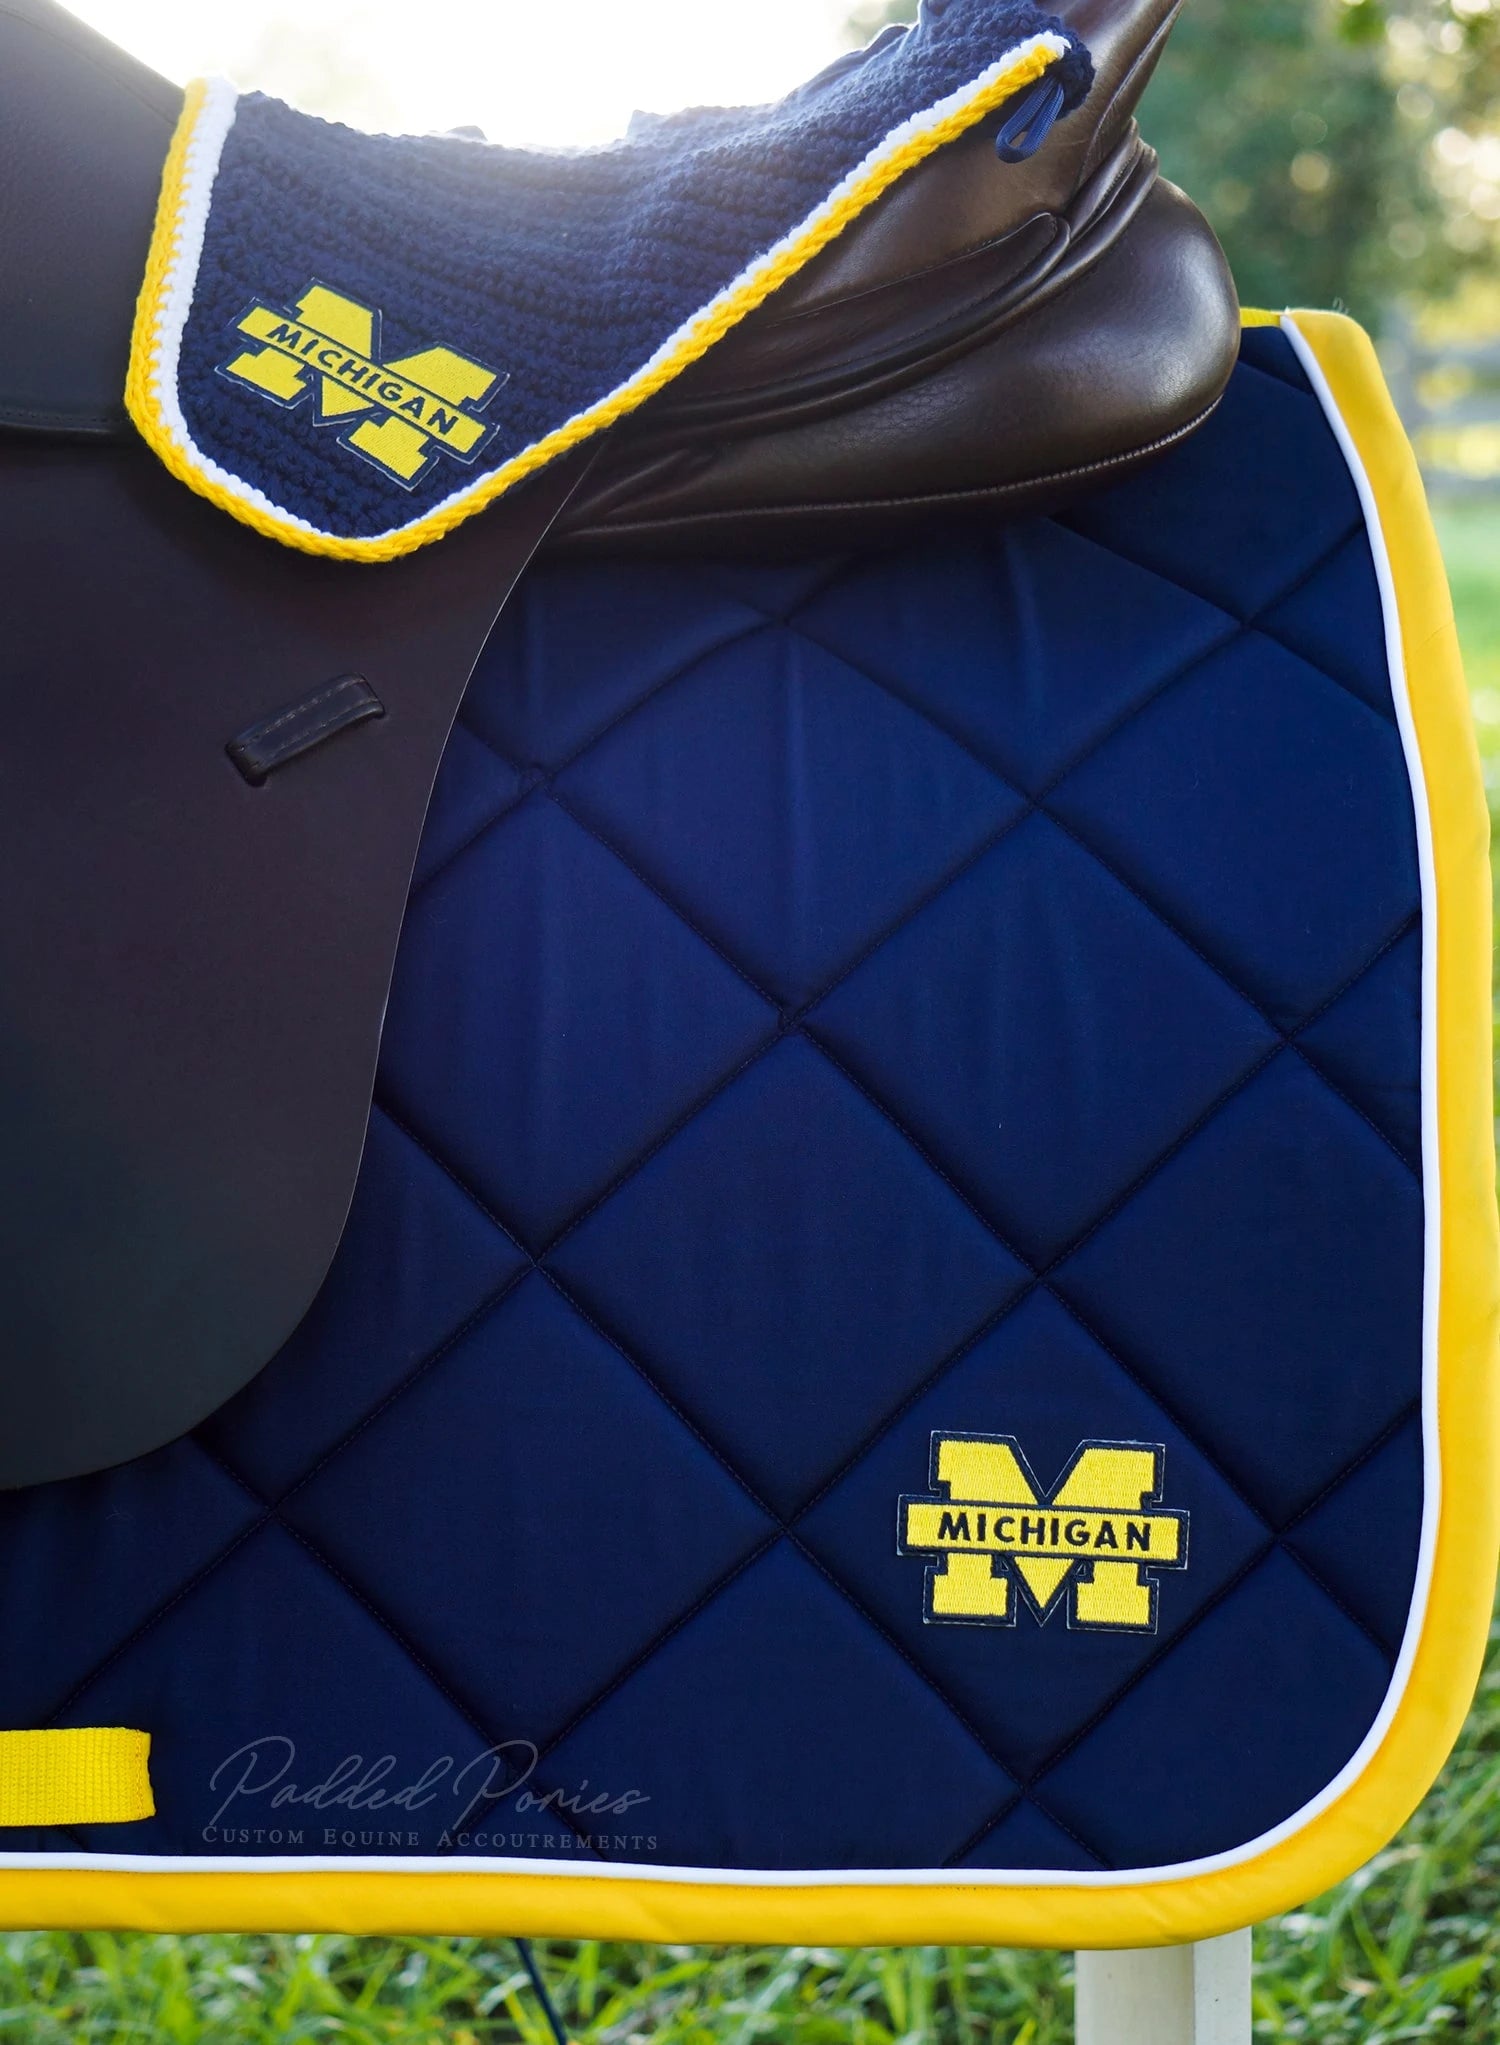 University of Michigan Patch Blue and Yellow All Purpose Saddle Pad with Matching Fly Veil Bonnet